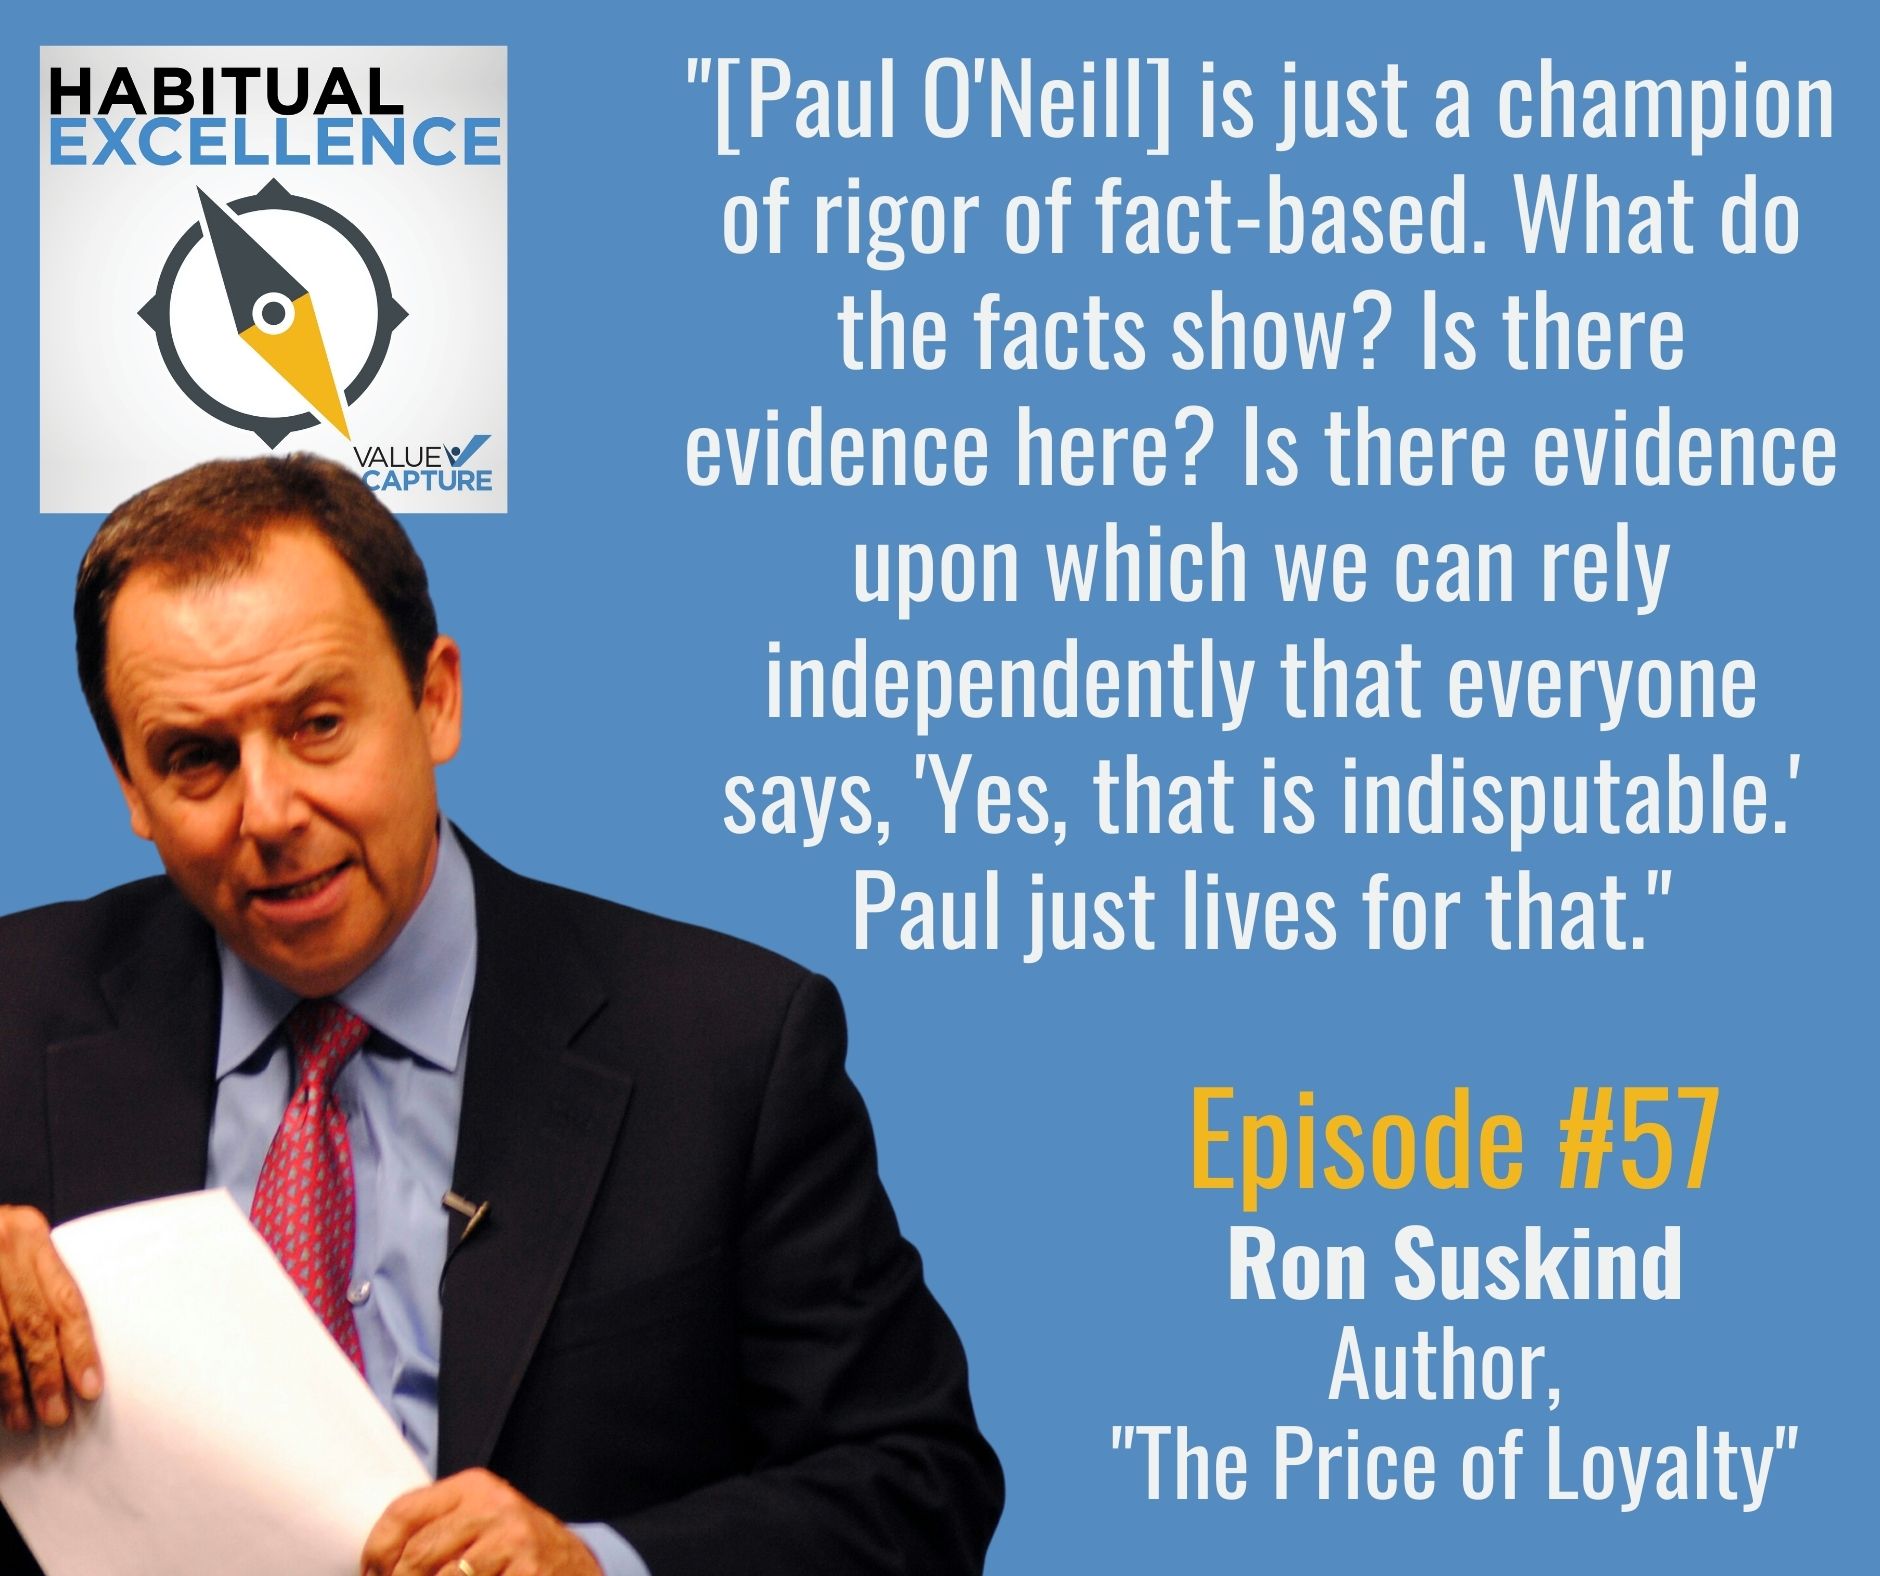 "[Paul O'Neill] is just a champion of rigor of fact-based. What do the facts show? Is there evidence here? Is there evidence upon which we can rely independently that everyone says, 'Yes, that is indisputable.' Paul just lives for that."